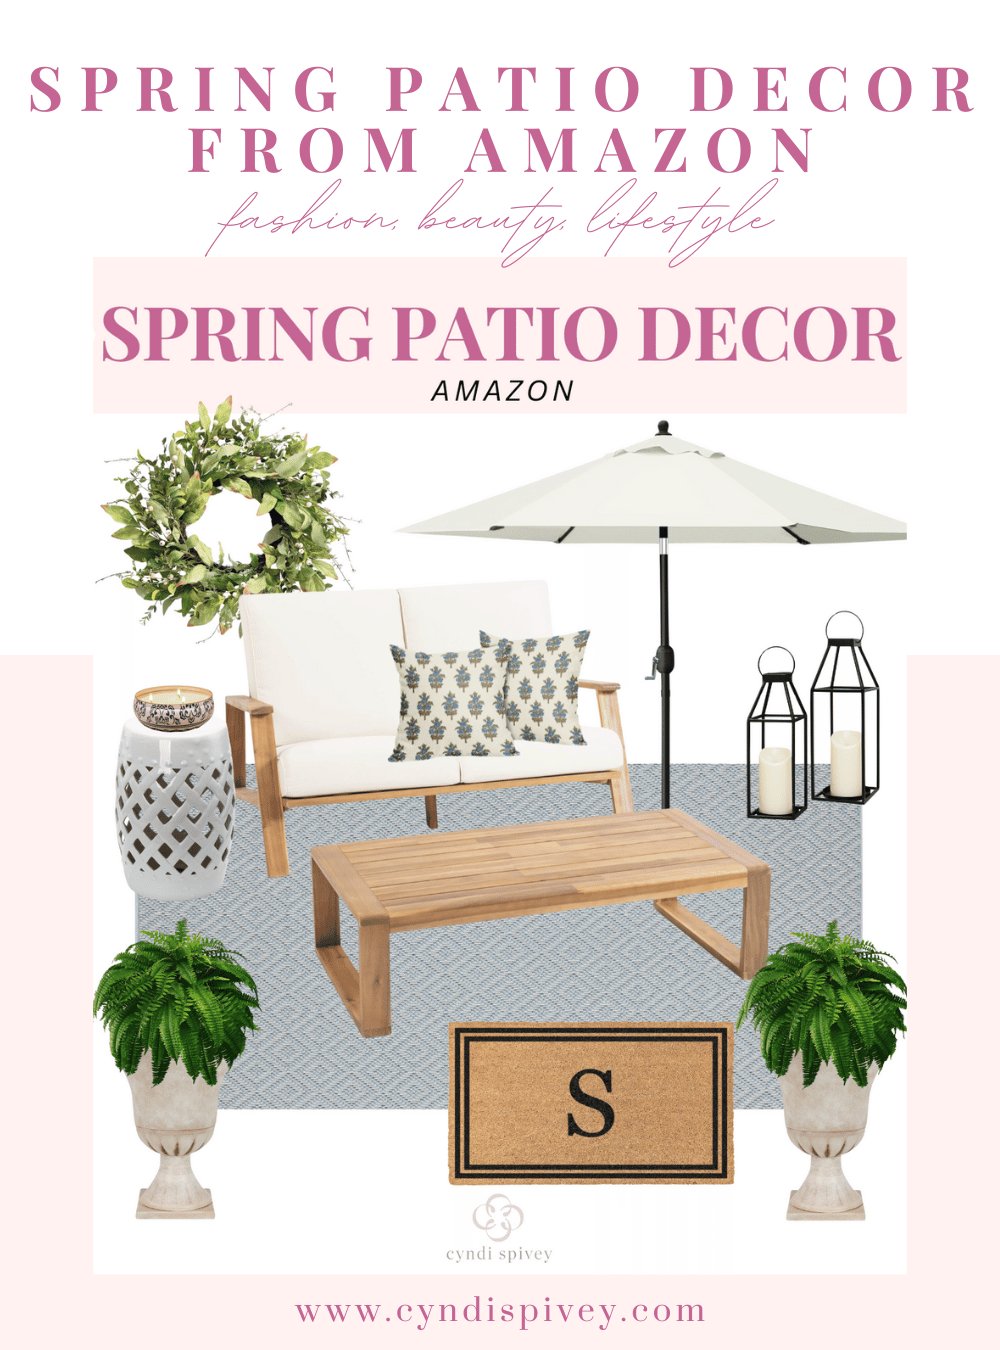 spring patio furniture and decor from amazon, spring patio inspo, amazon, amazon home finds, spring, spring decor, spring patio decor, amazon favorites, outdoor furniture, outdoor decor, pin for later, save for later, pinterest